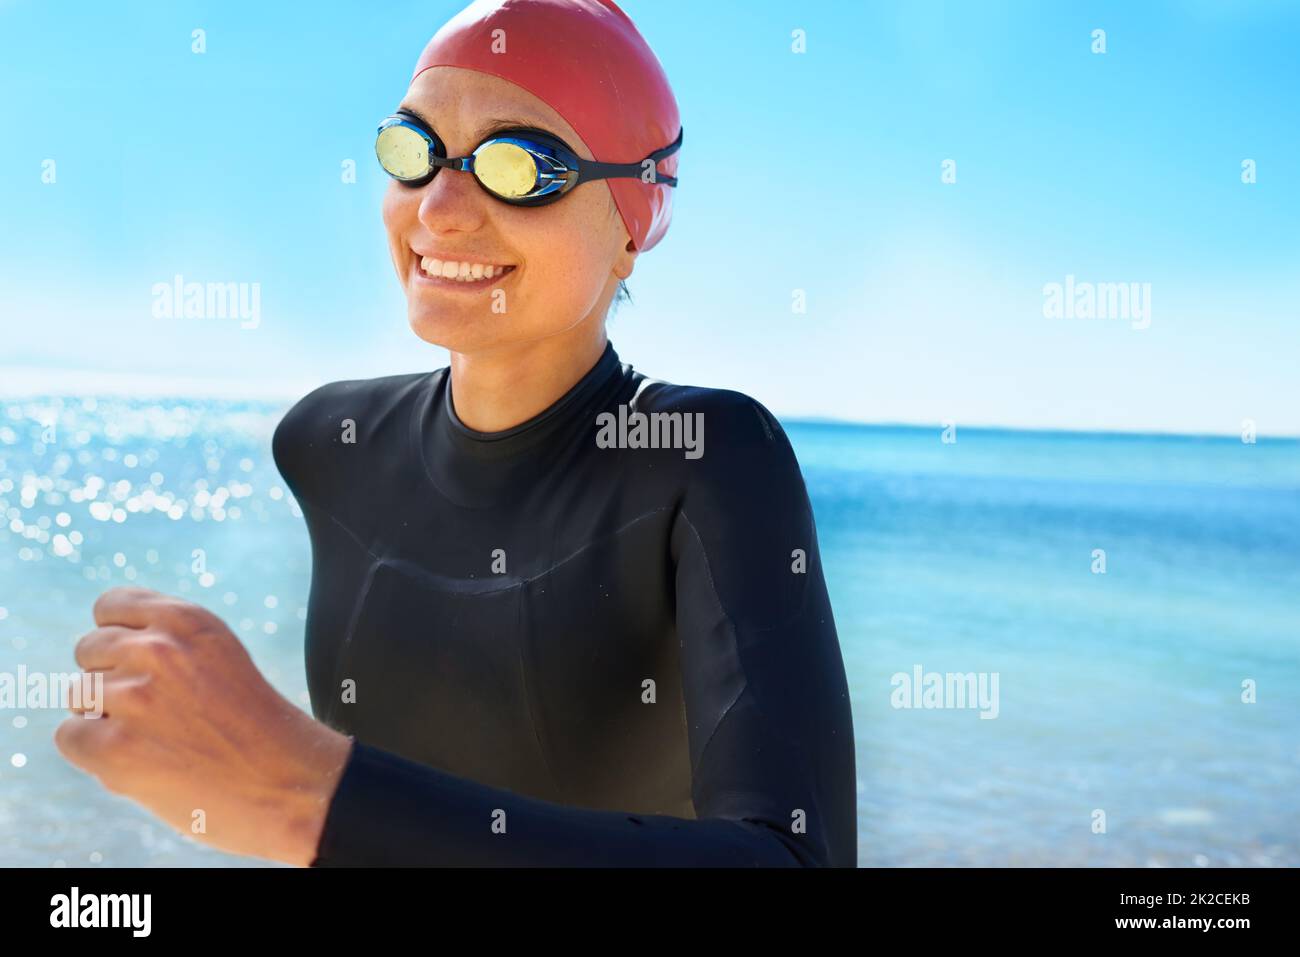 Training to be a lifesaver. A young woman training in a full piece wetsuit and swimming gear on the beach in the winter. Stock Photo